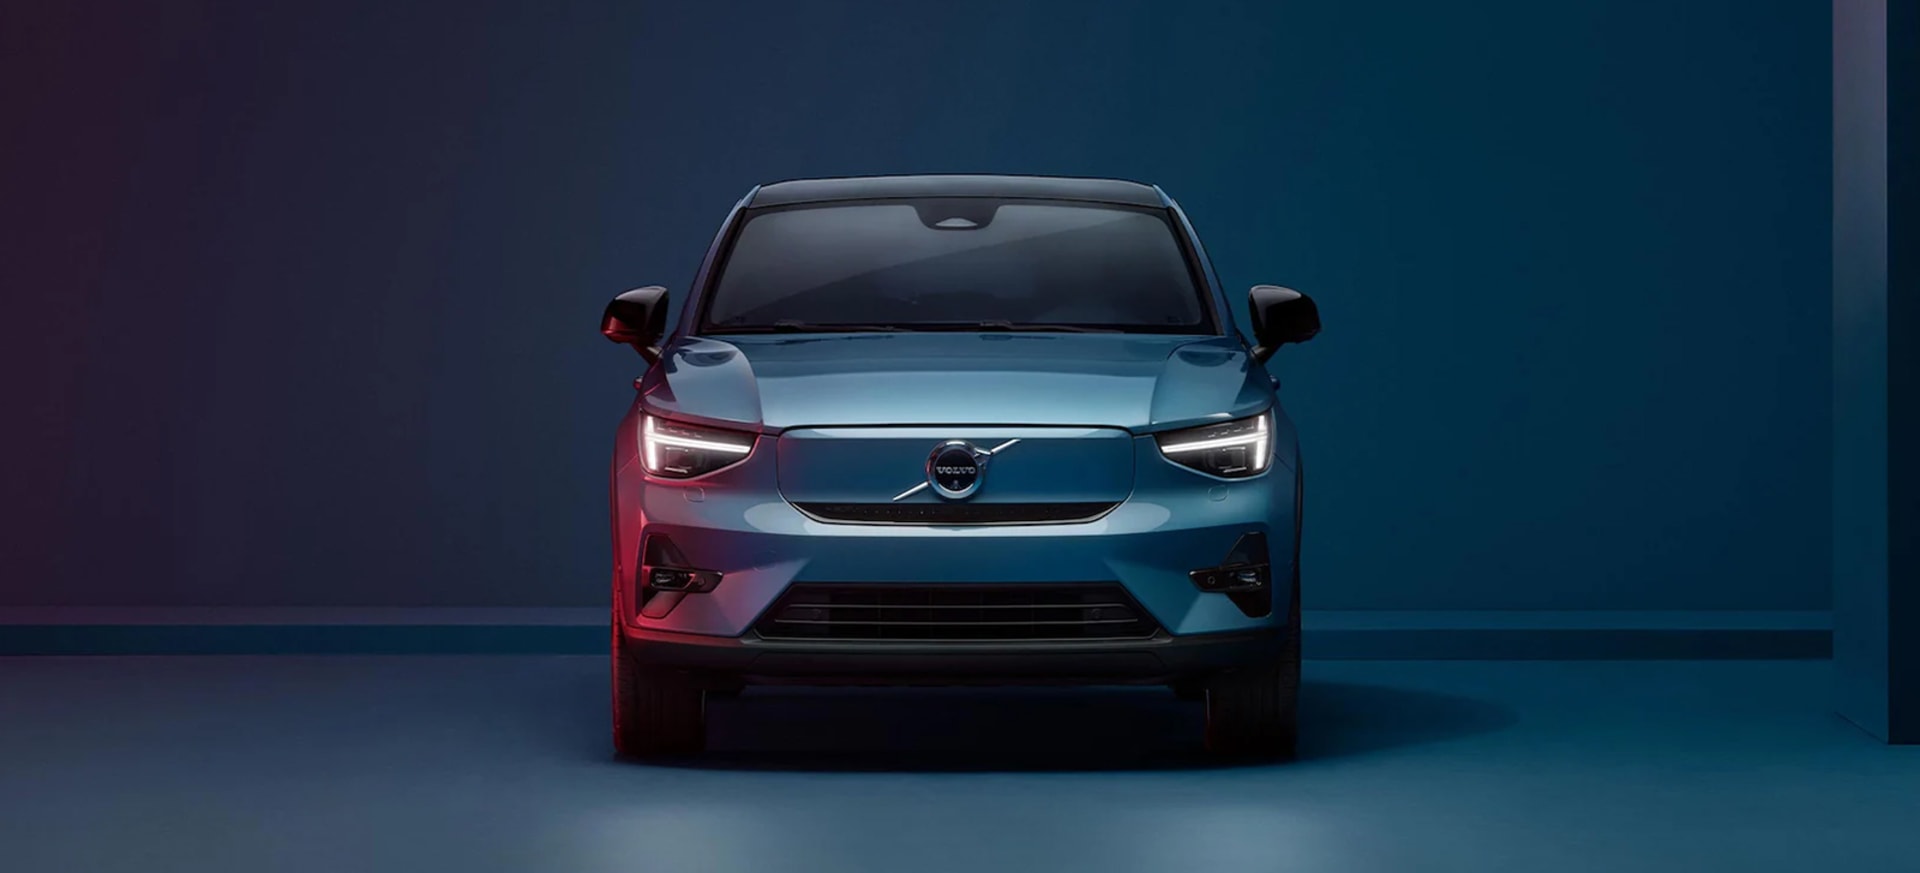 Introducing our first pure electric crossover.